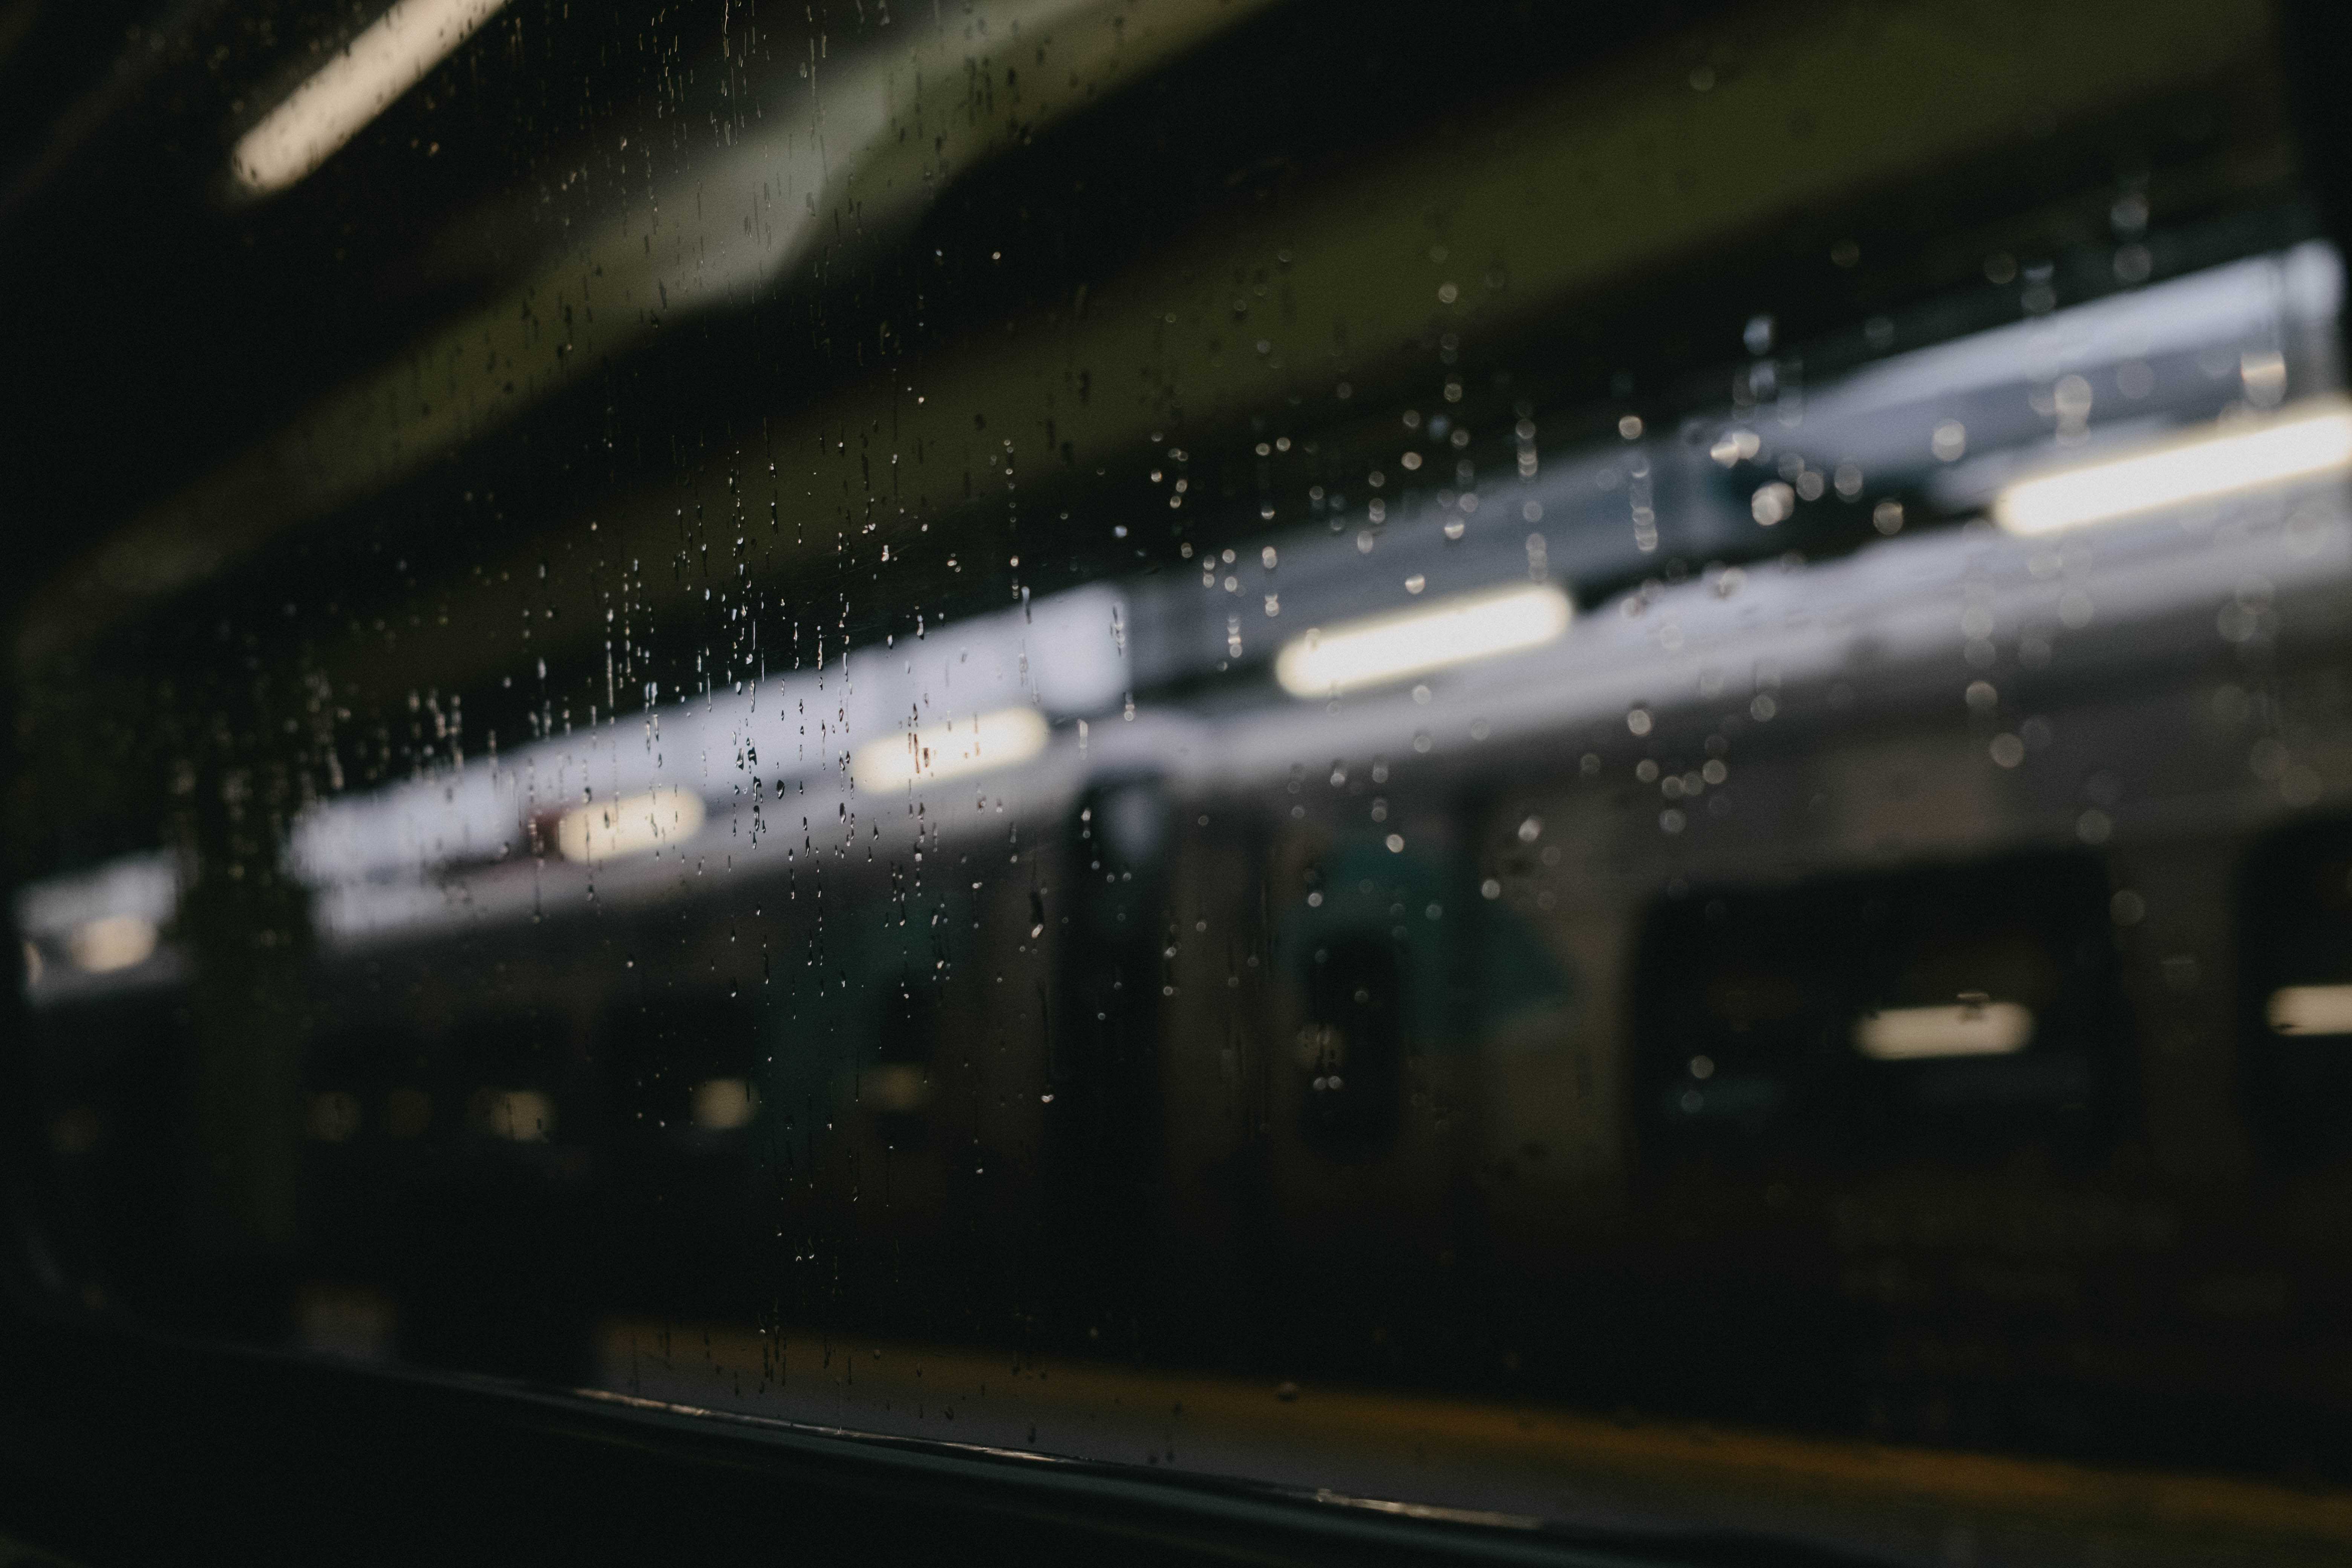 Shallow depth of field from inside a train, looking out the window. Streaks of rain are in focus while everthing else outside the window is blurred.